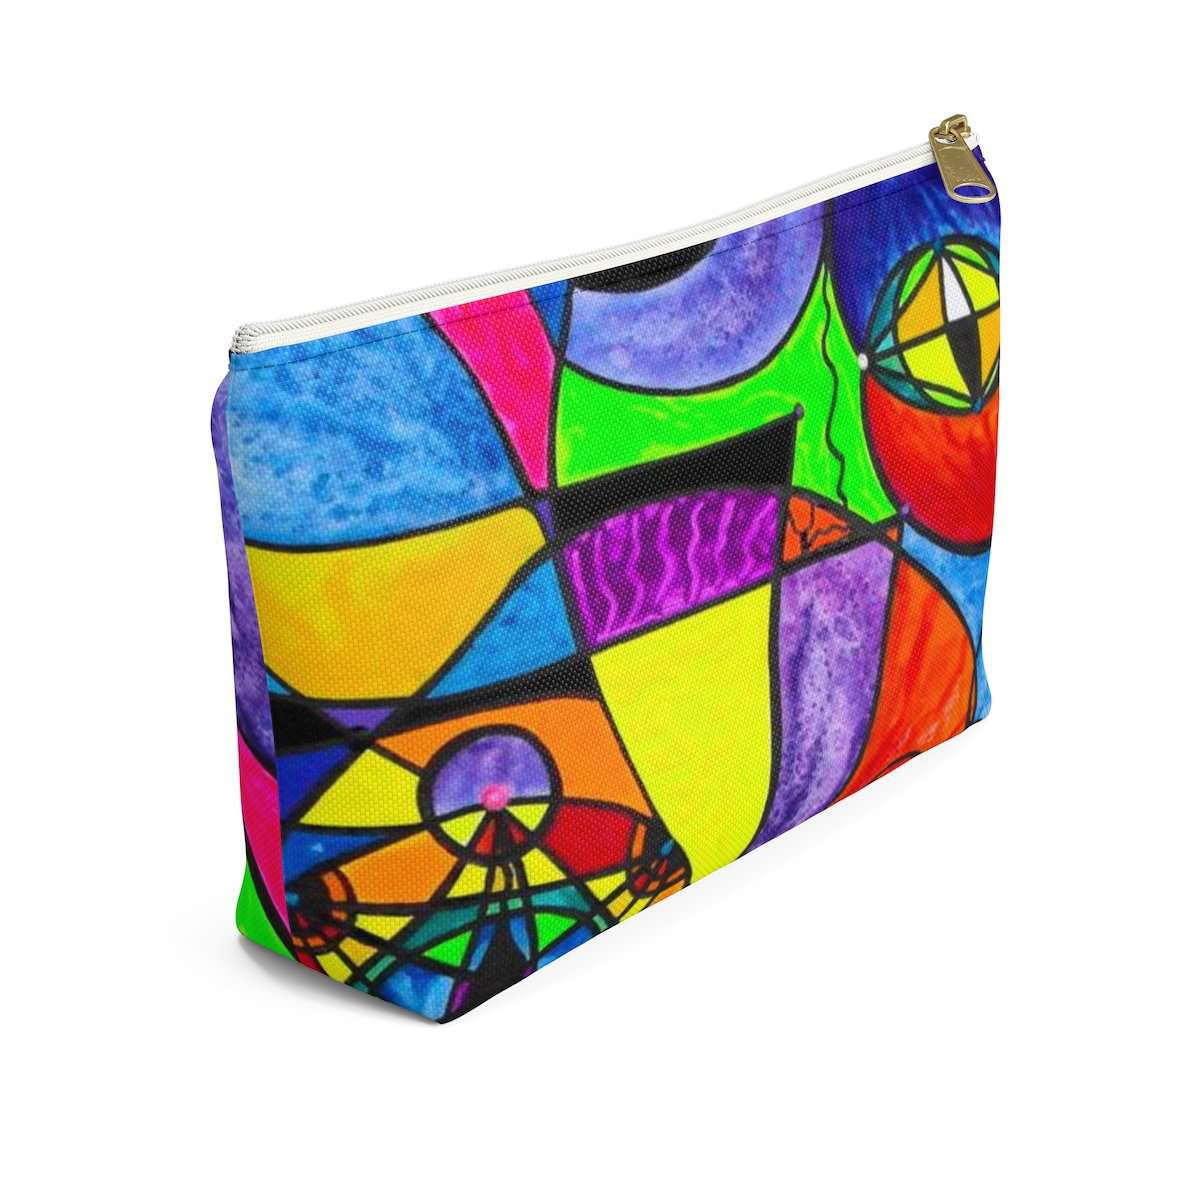 find-your-favorite-the-power-lattice-accessory-pouch-w-t-bottom-online-sale_2.jpg